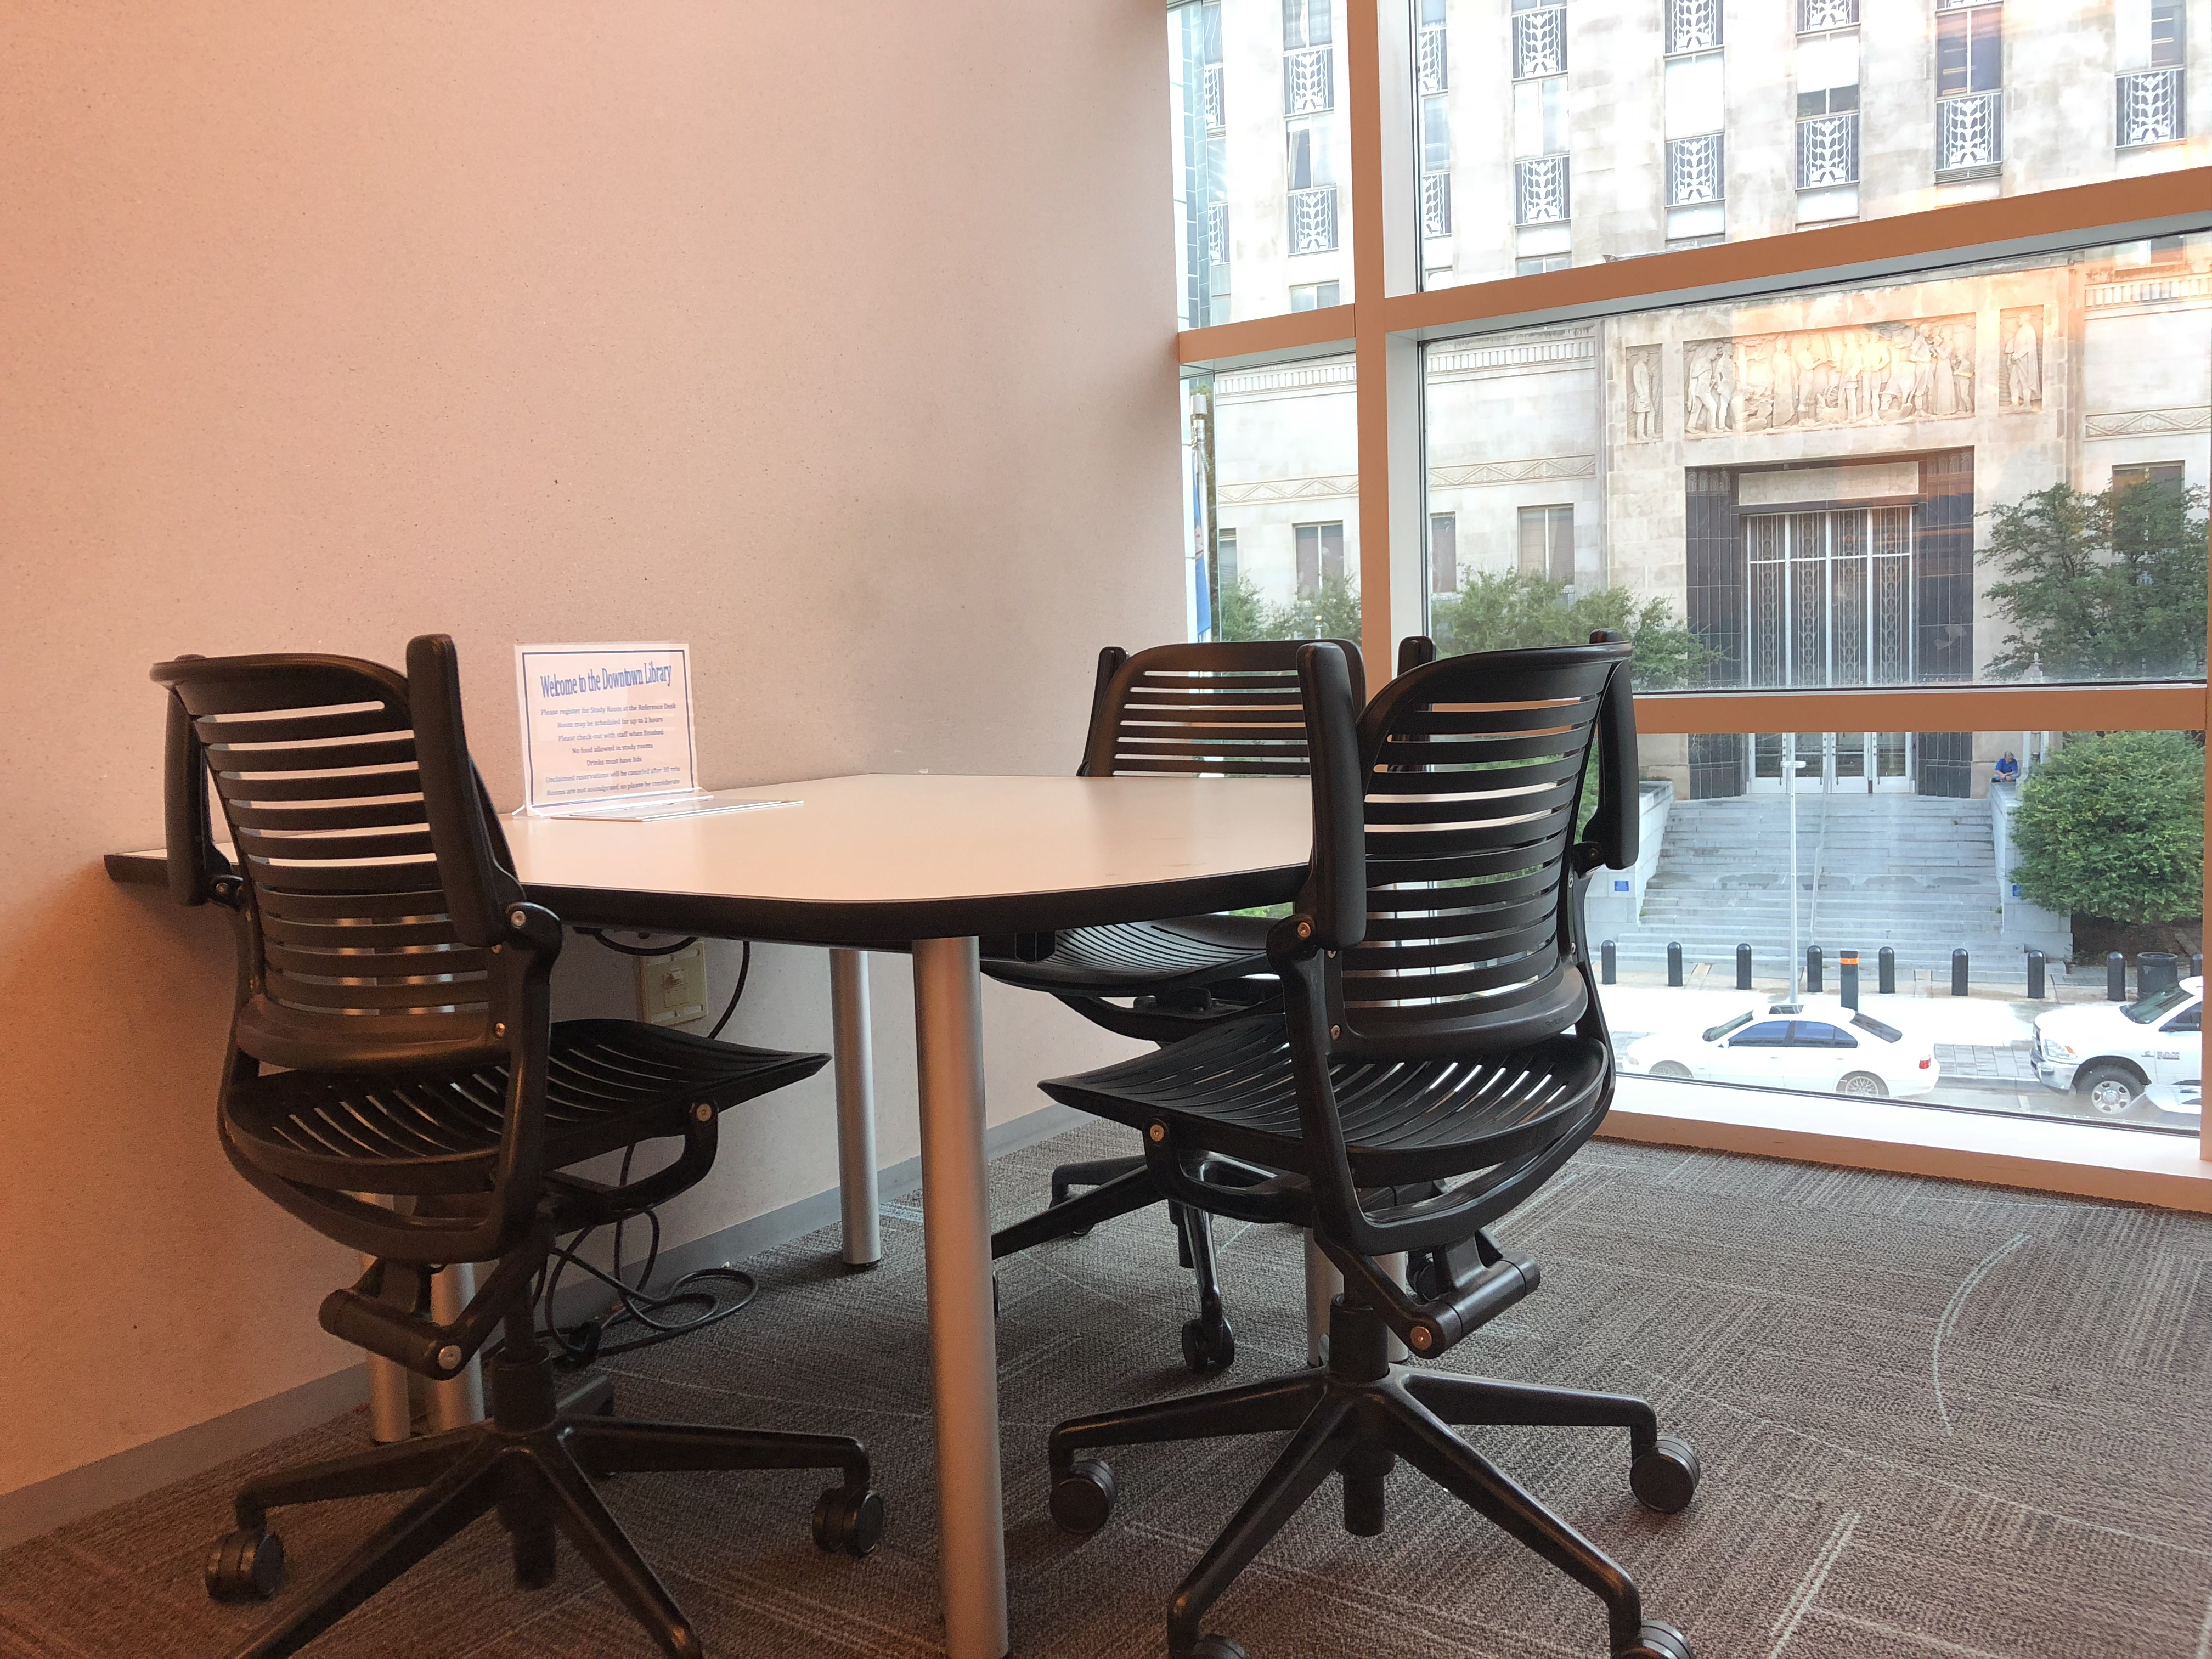 Study Room C at the Downtown Library with a small table and 3 chairs